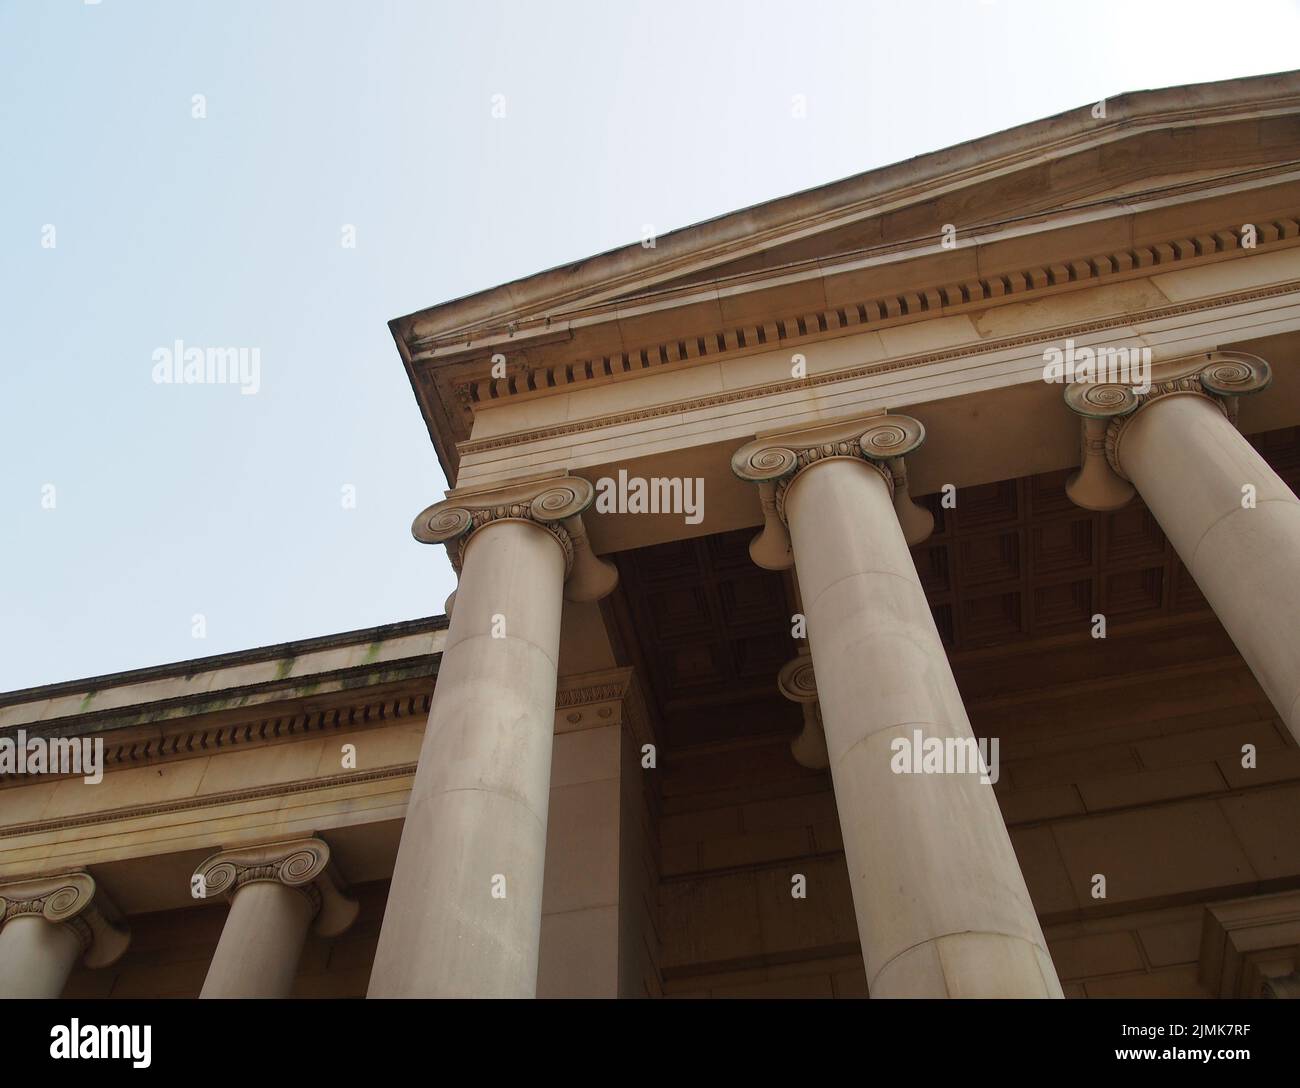 Street view of the classical columns on the facade of the historic 19th century manchester gallery Stock Photo